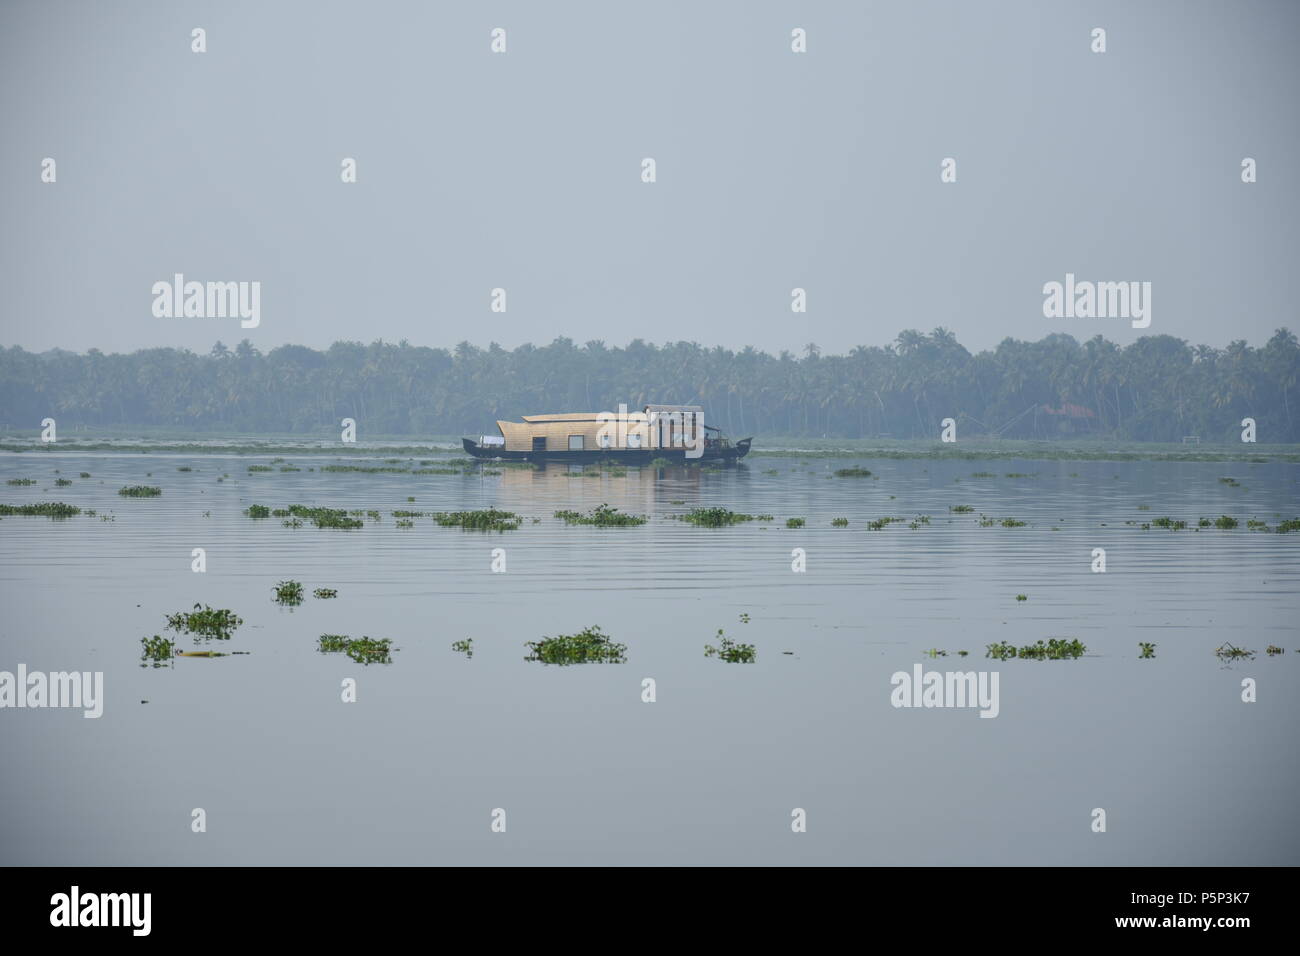 View of House boat riding in Vembanad kayal, Alappuzha. Stock Photo